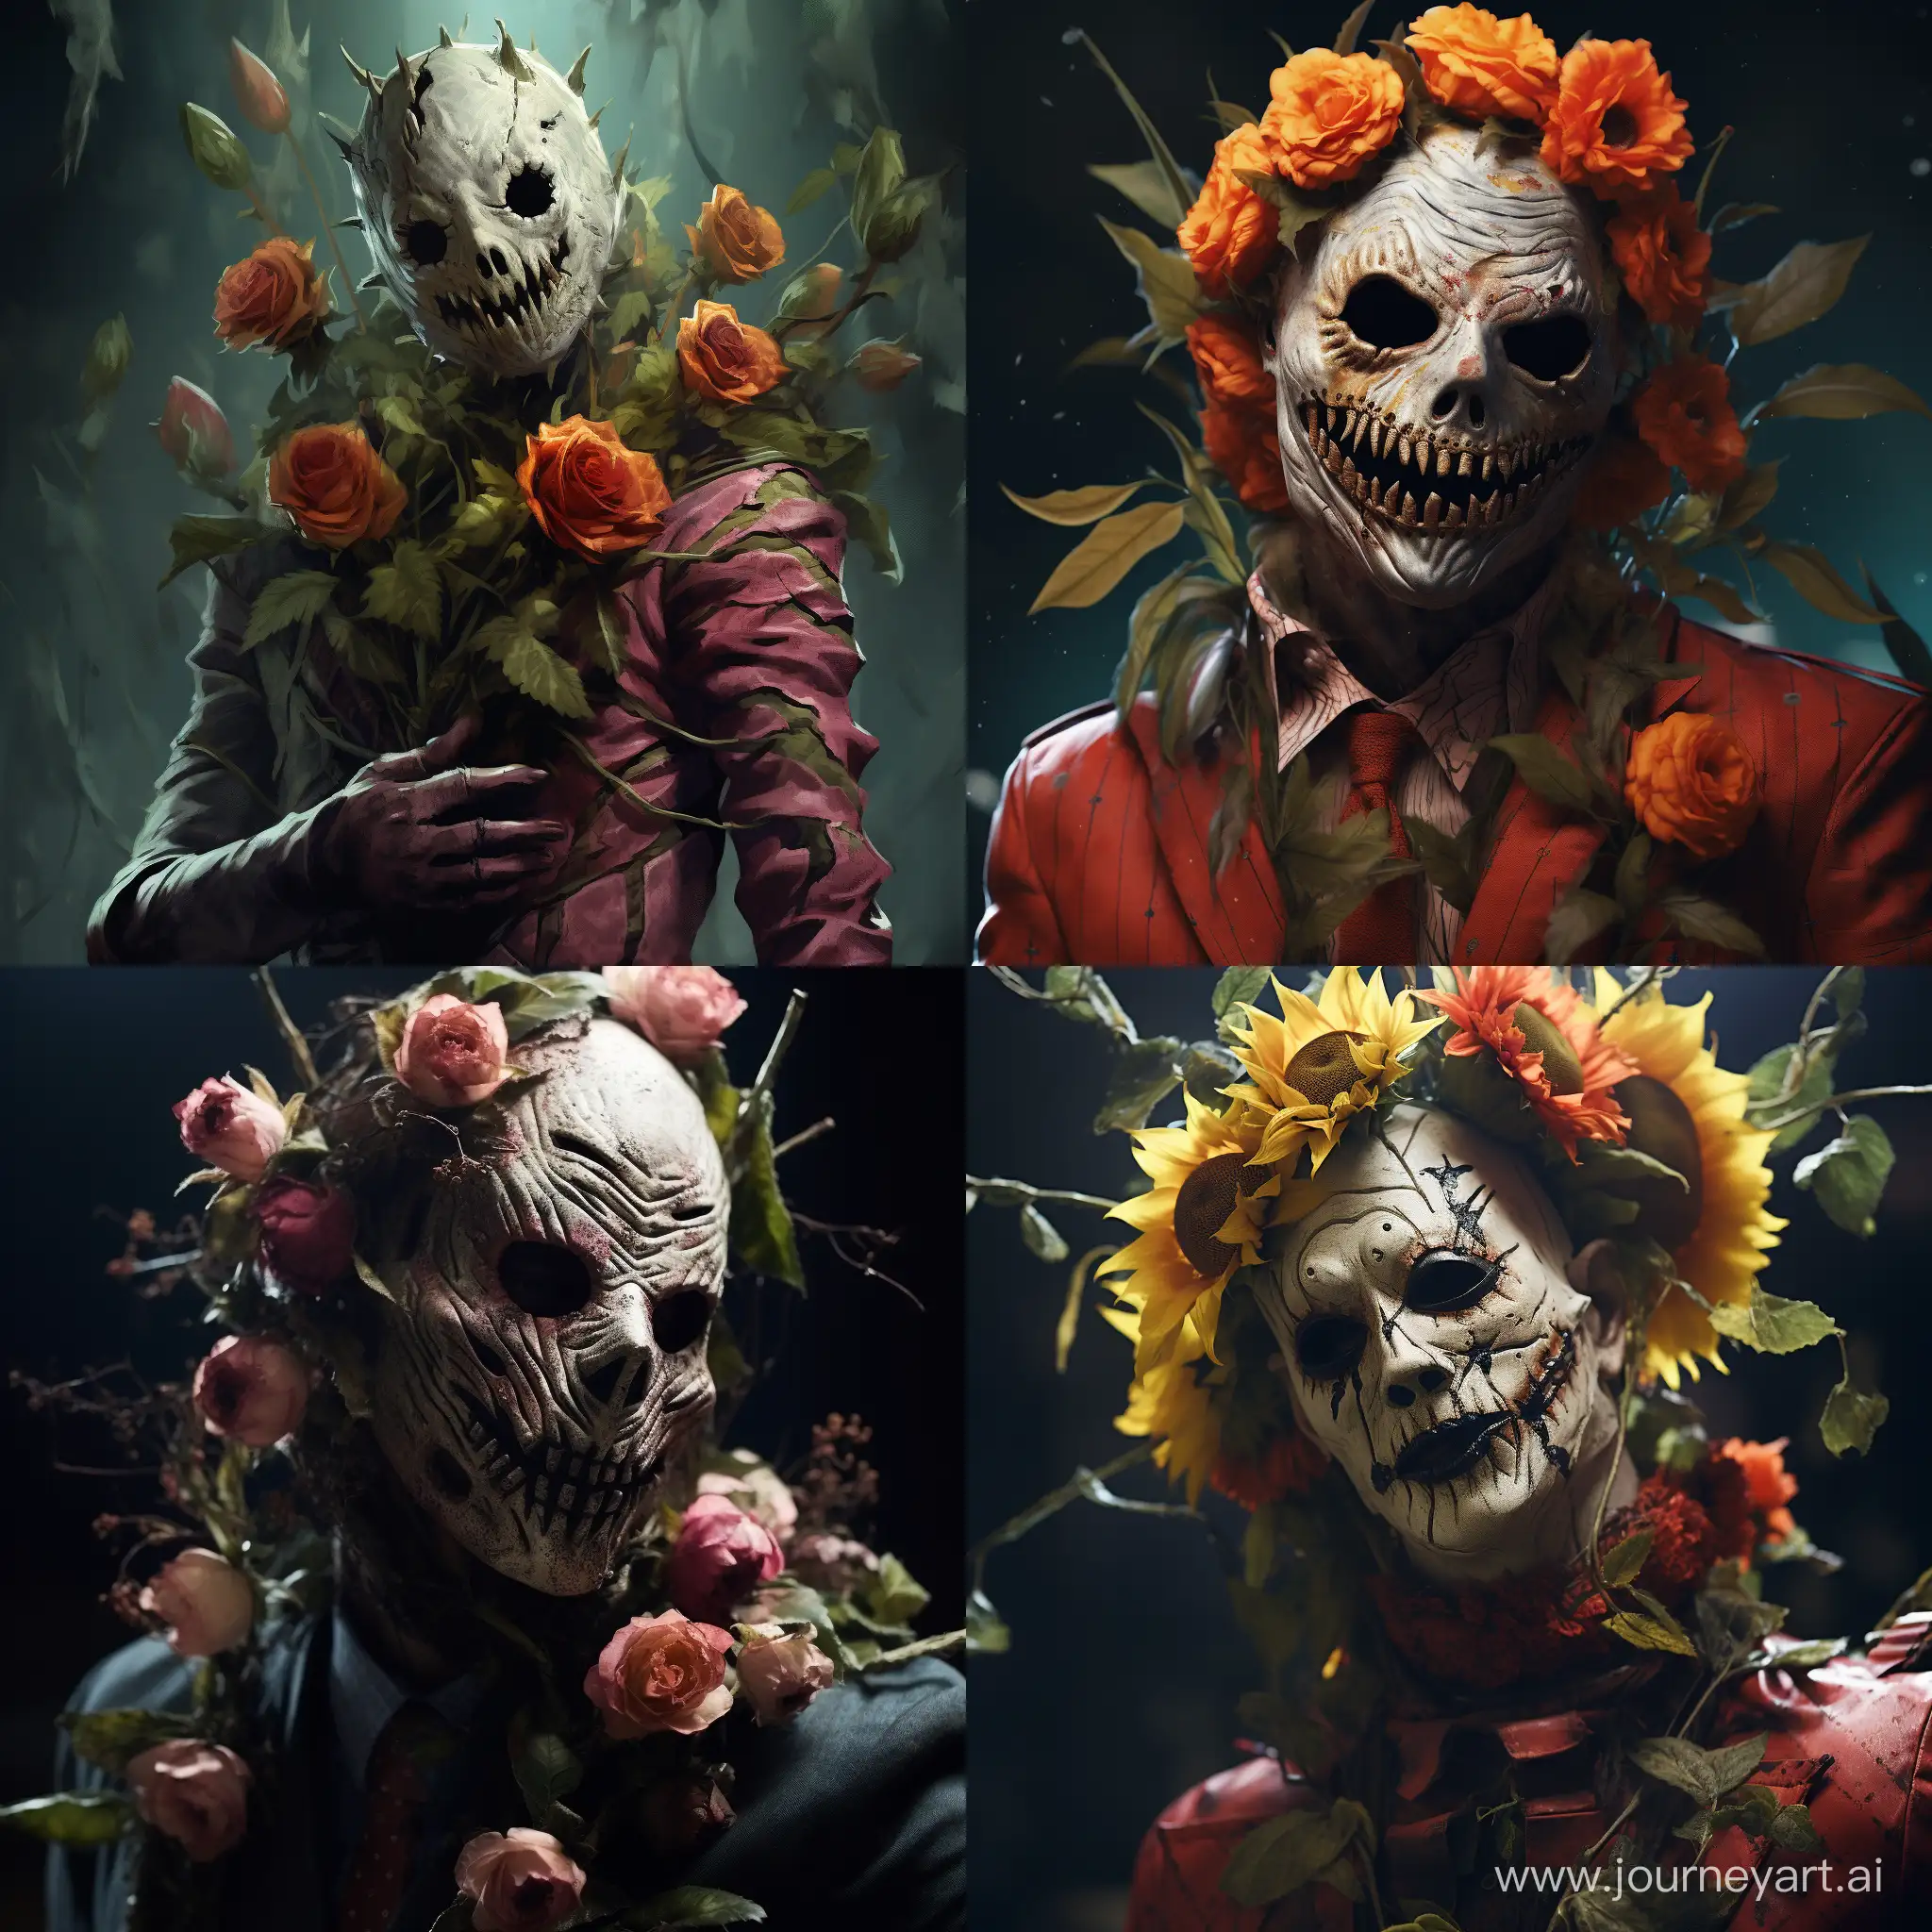 flowerman from lethal company as a horror villain